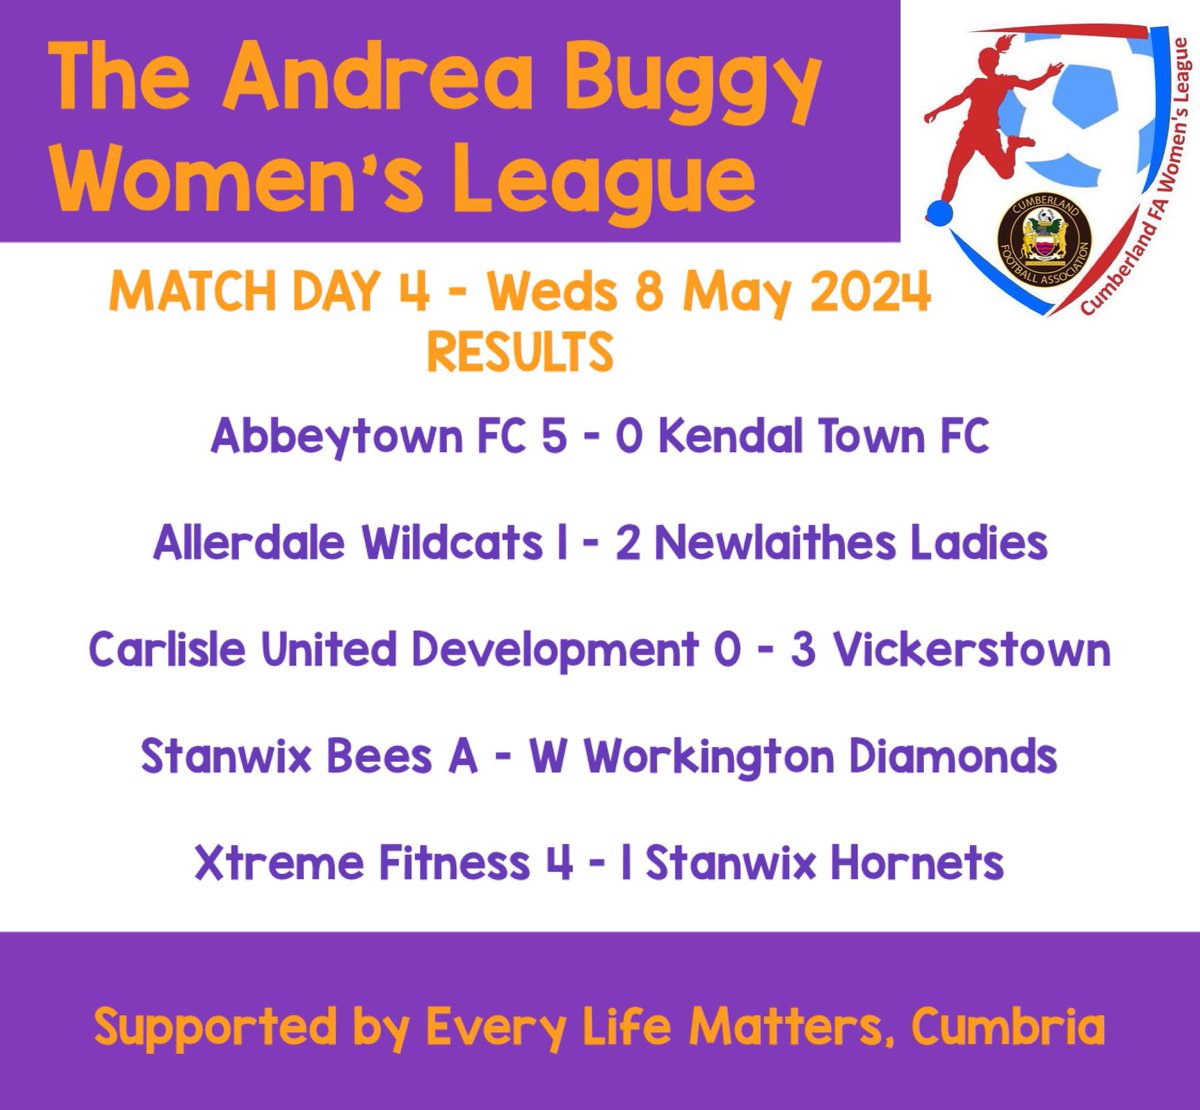 MATCH DAY 4 | This week’s Women’s League games! Keep up to date with what’s what… 👉bit.ly/ABL_Fixtures Results are in👇